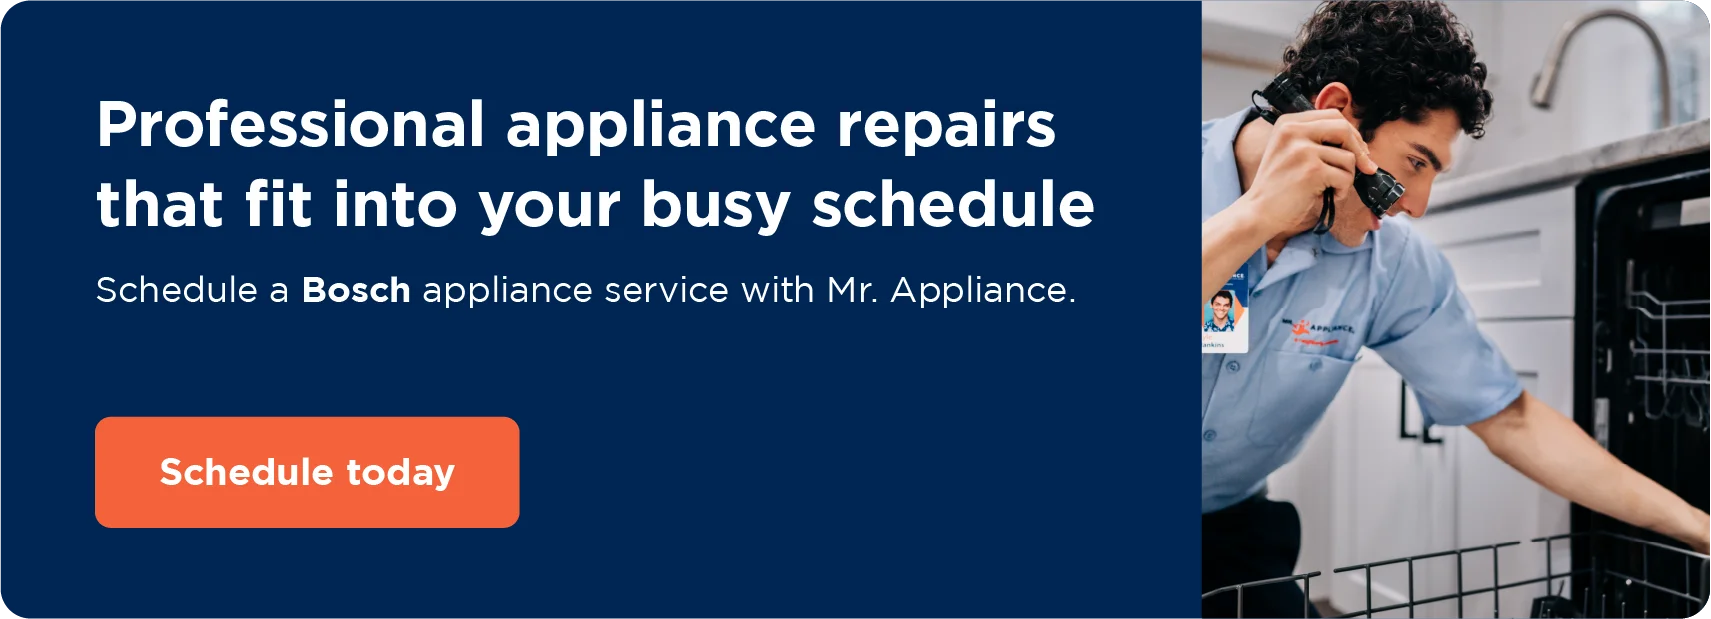  Graphic explaining how to schedule Bosch appliance repair with Mr. Appliance.